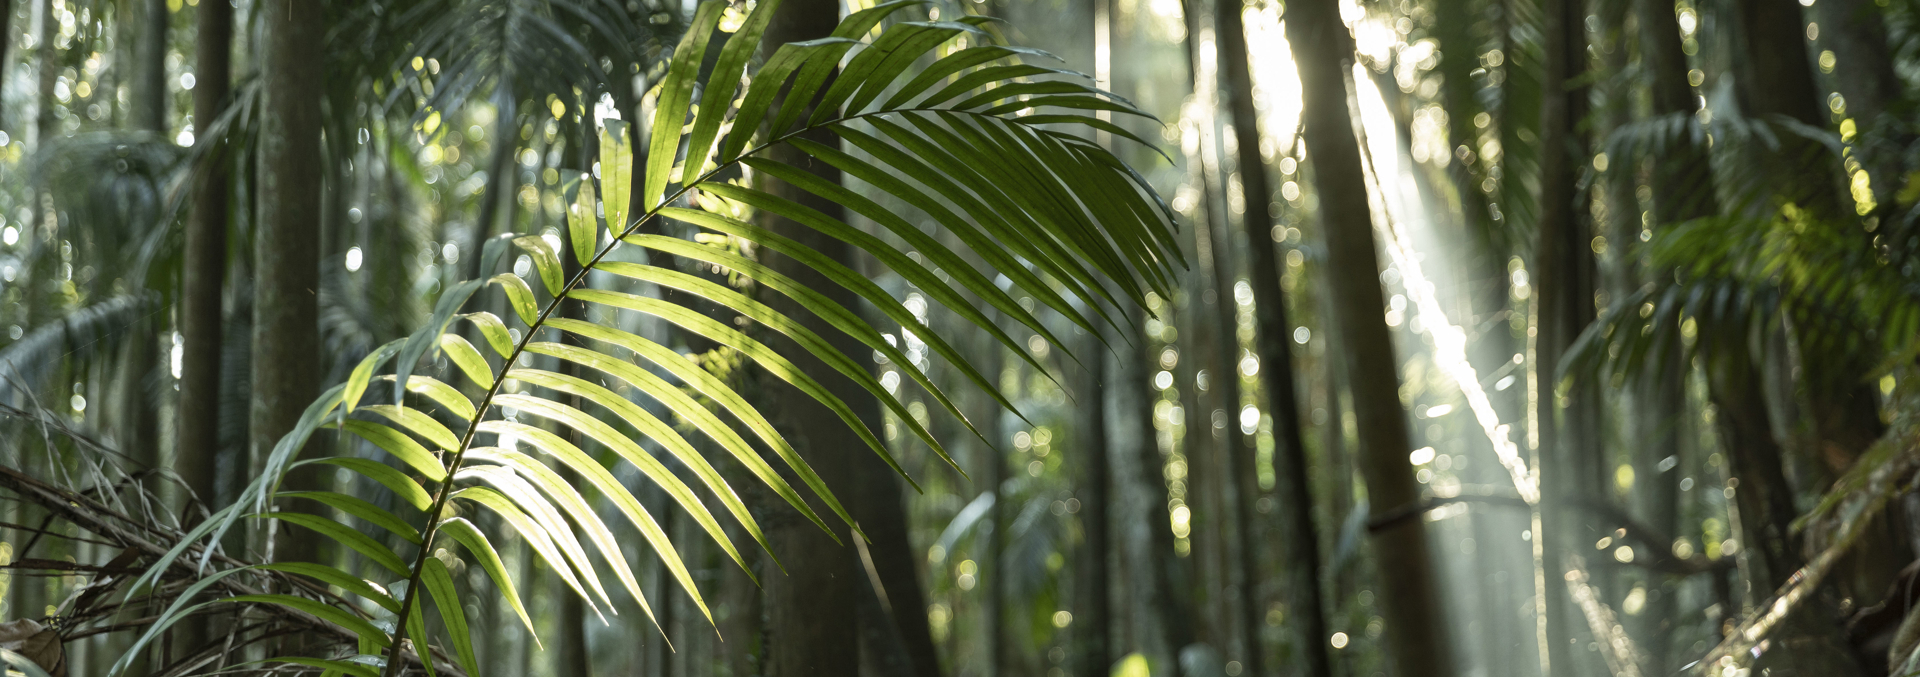 A palm tree frond is in the forground of the image with tropical rainforest greenery surrounding the fallen branch.